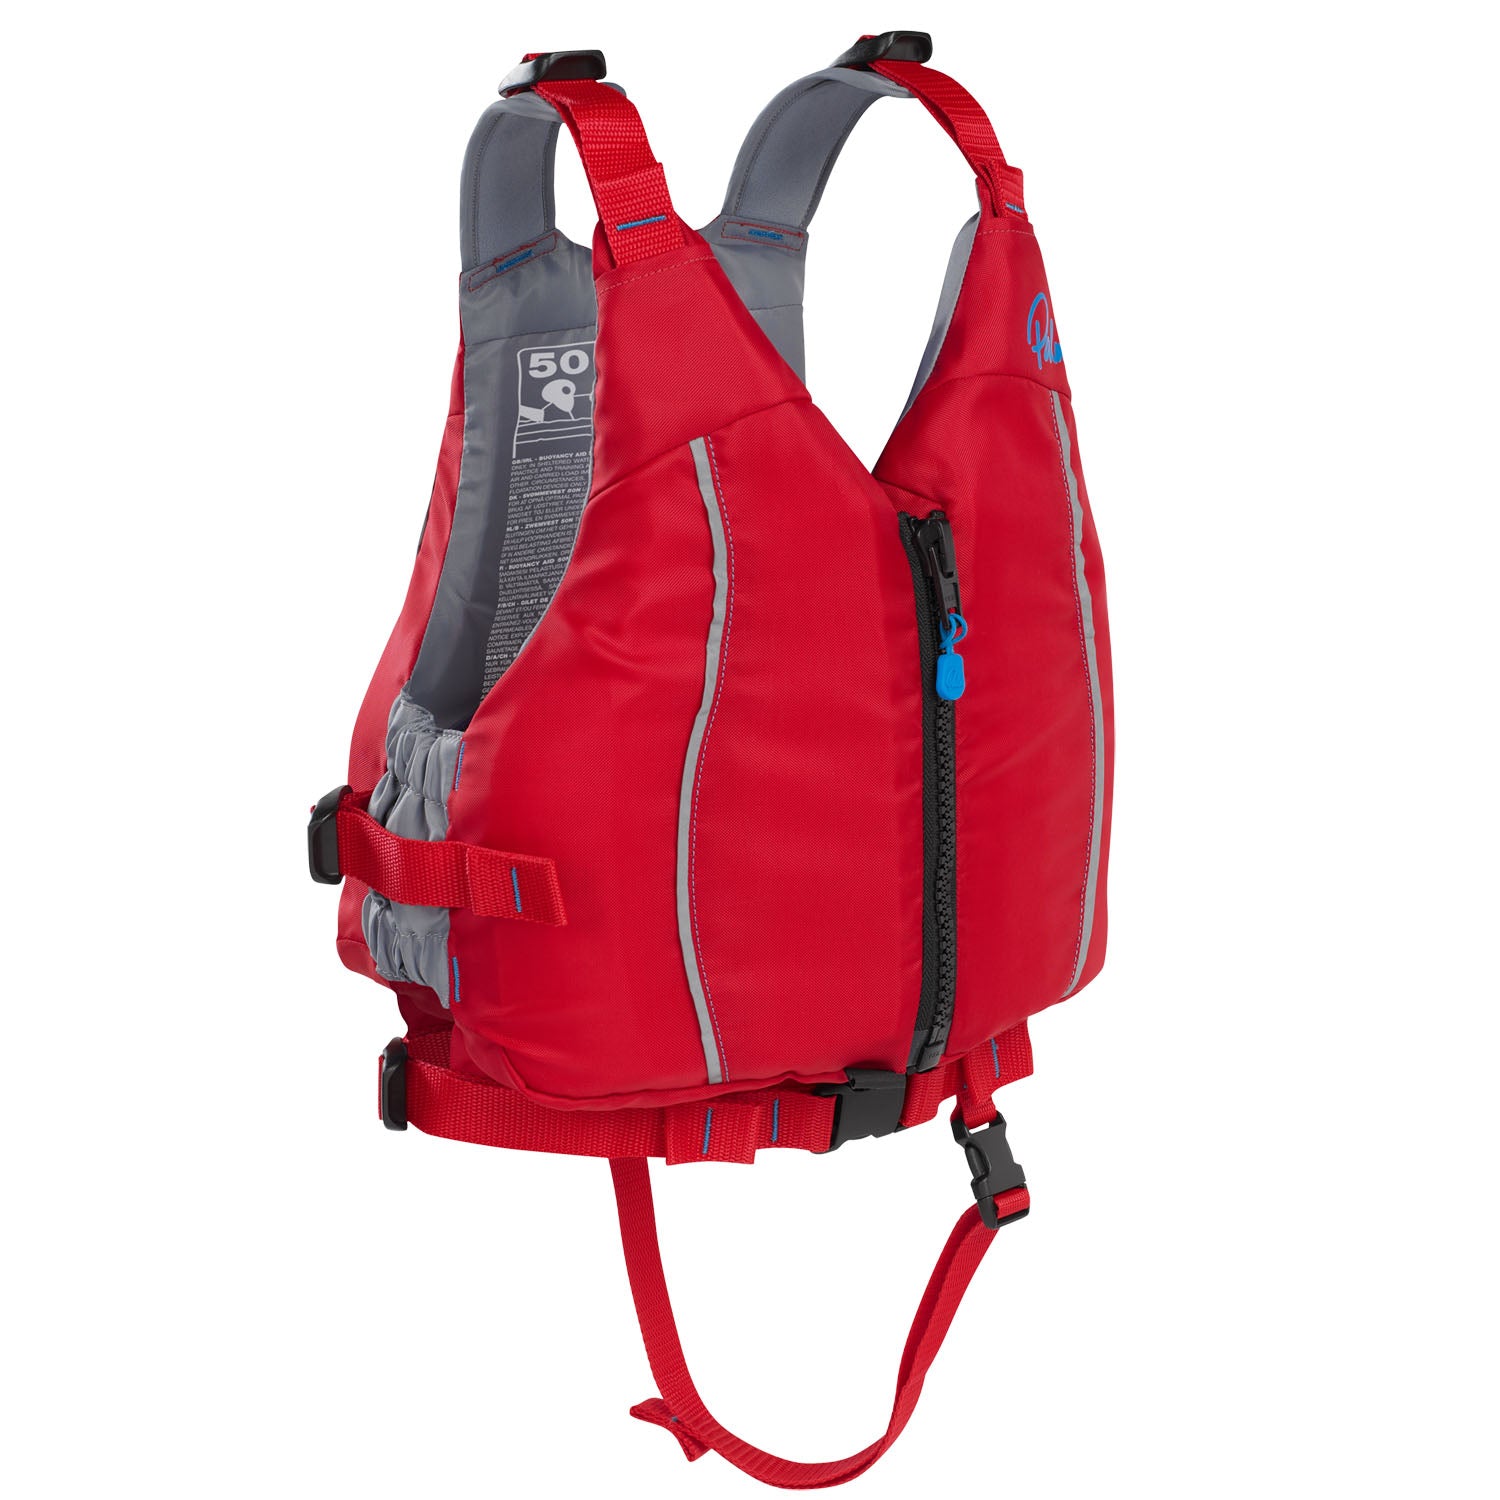 Palm Quest Kids Buoyancy Aid in the Red for Kids Medium/Large Size